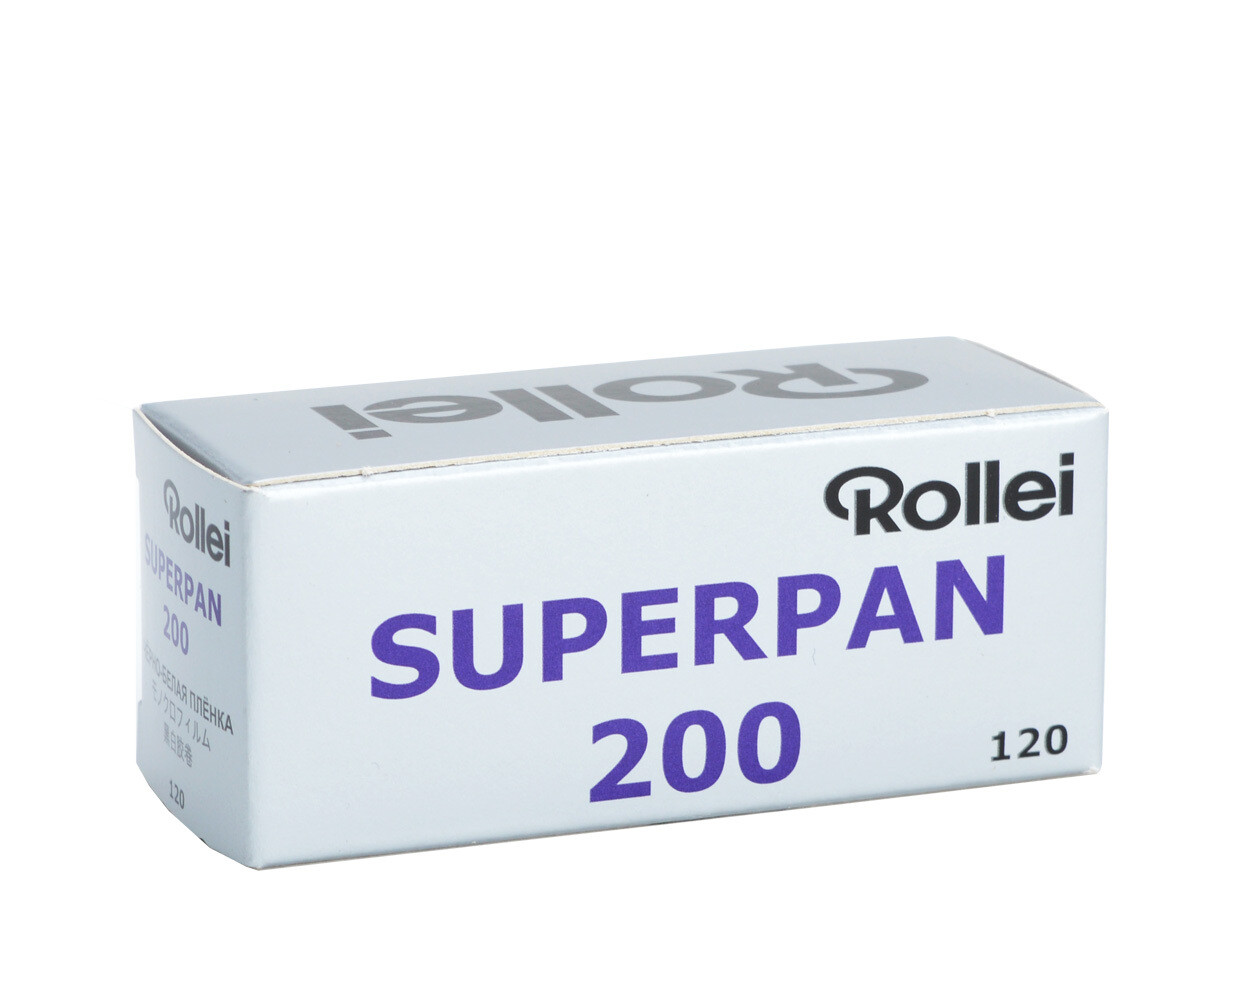 Rollei Superpan 200 Rollfilm Format 120 expired 10/2024 - Delivery time 3-8 workdays